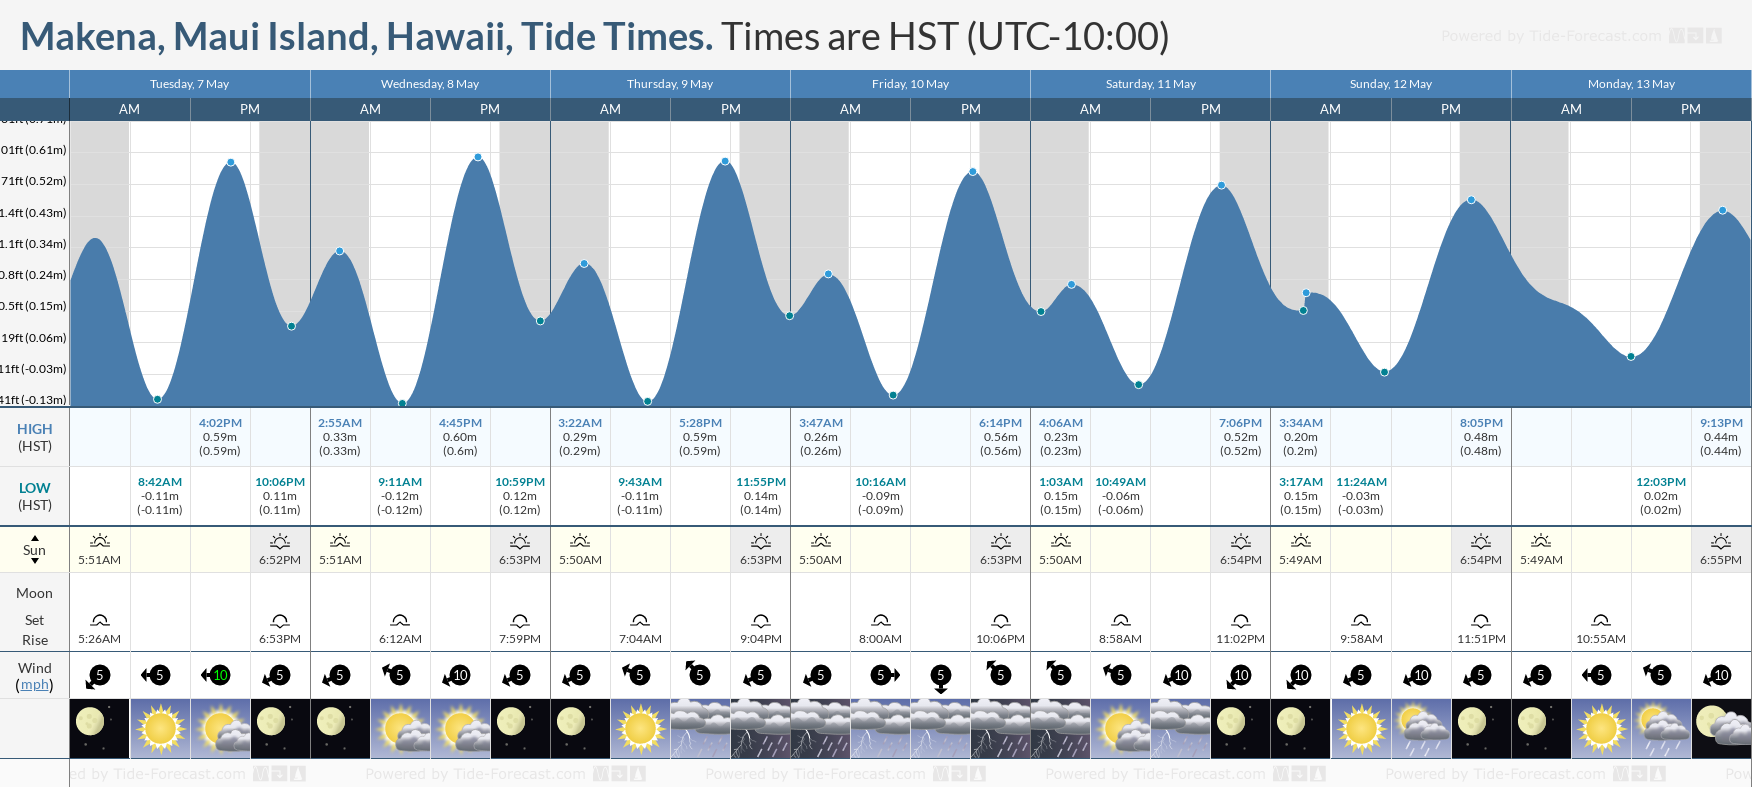 Makena, Maui Island, Hawaii Tide Chart including high and low tide tide times for the next 7 days